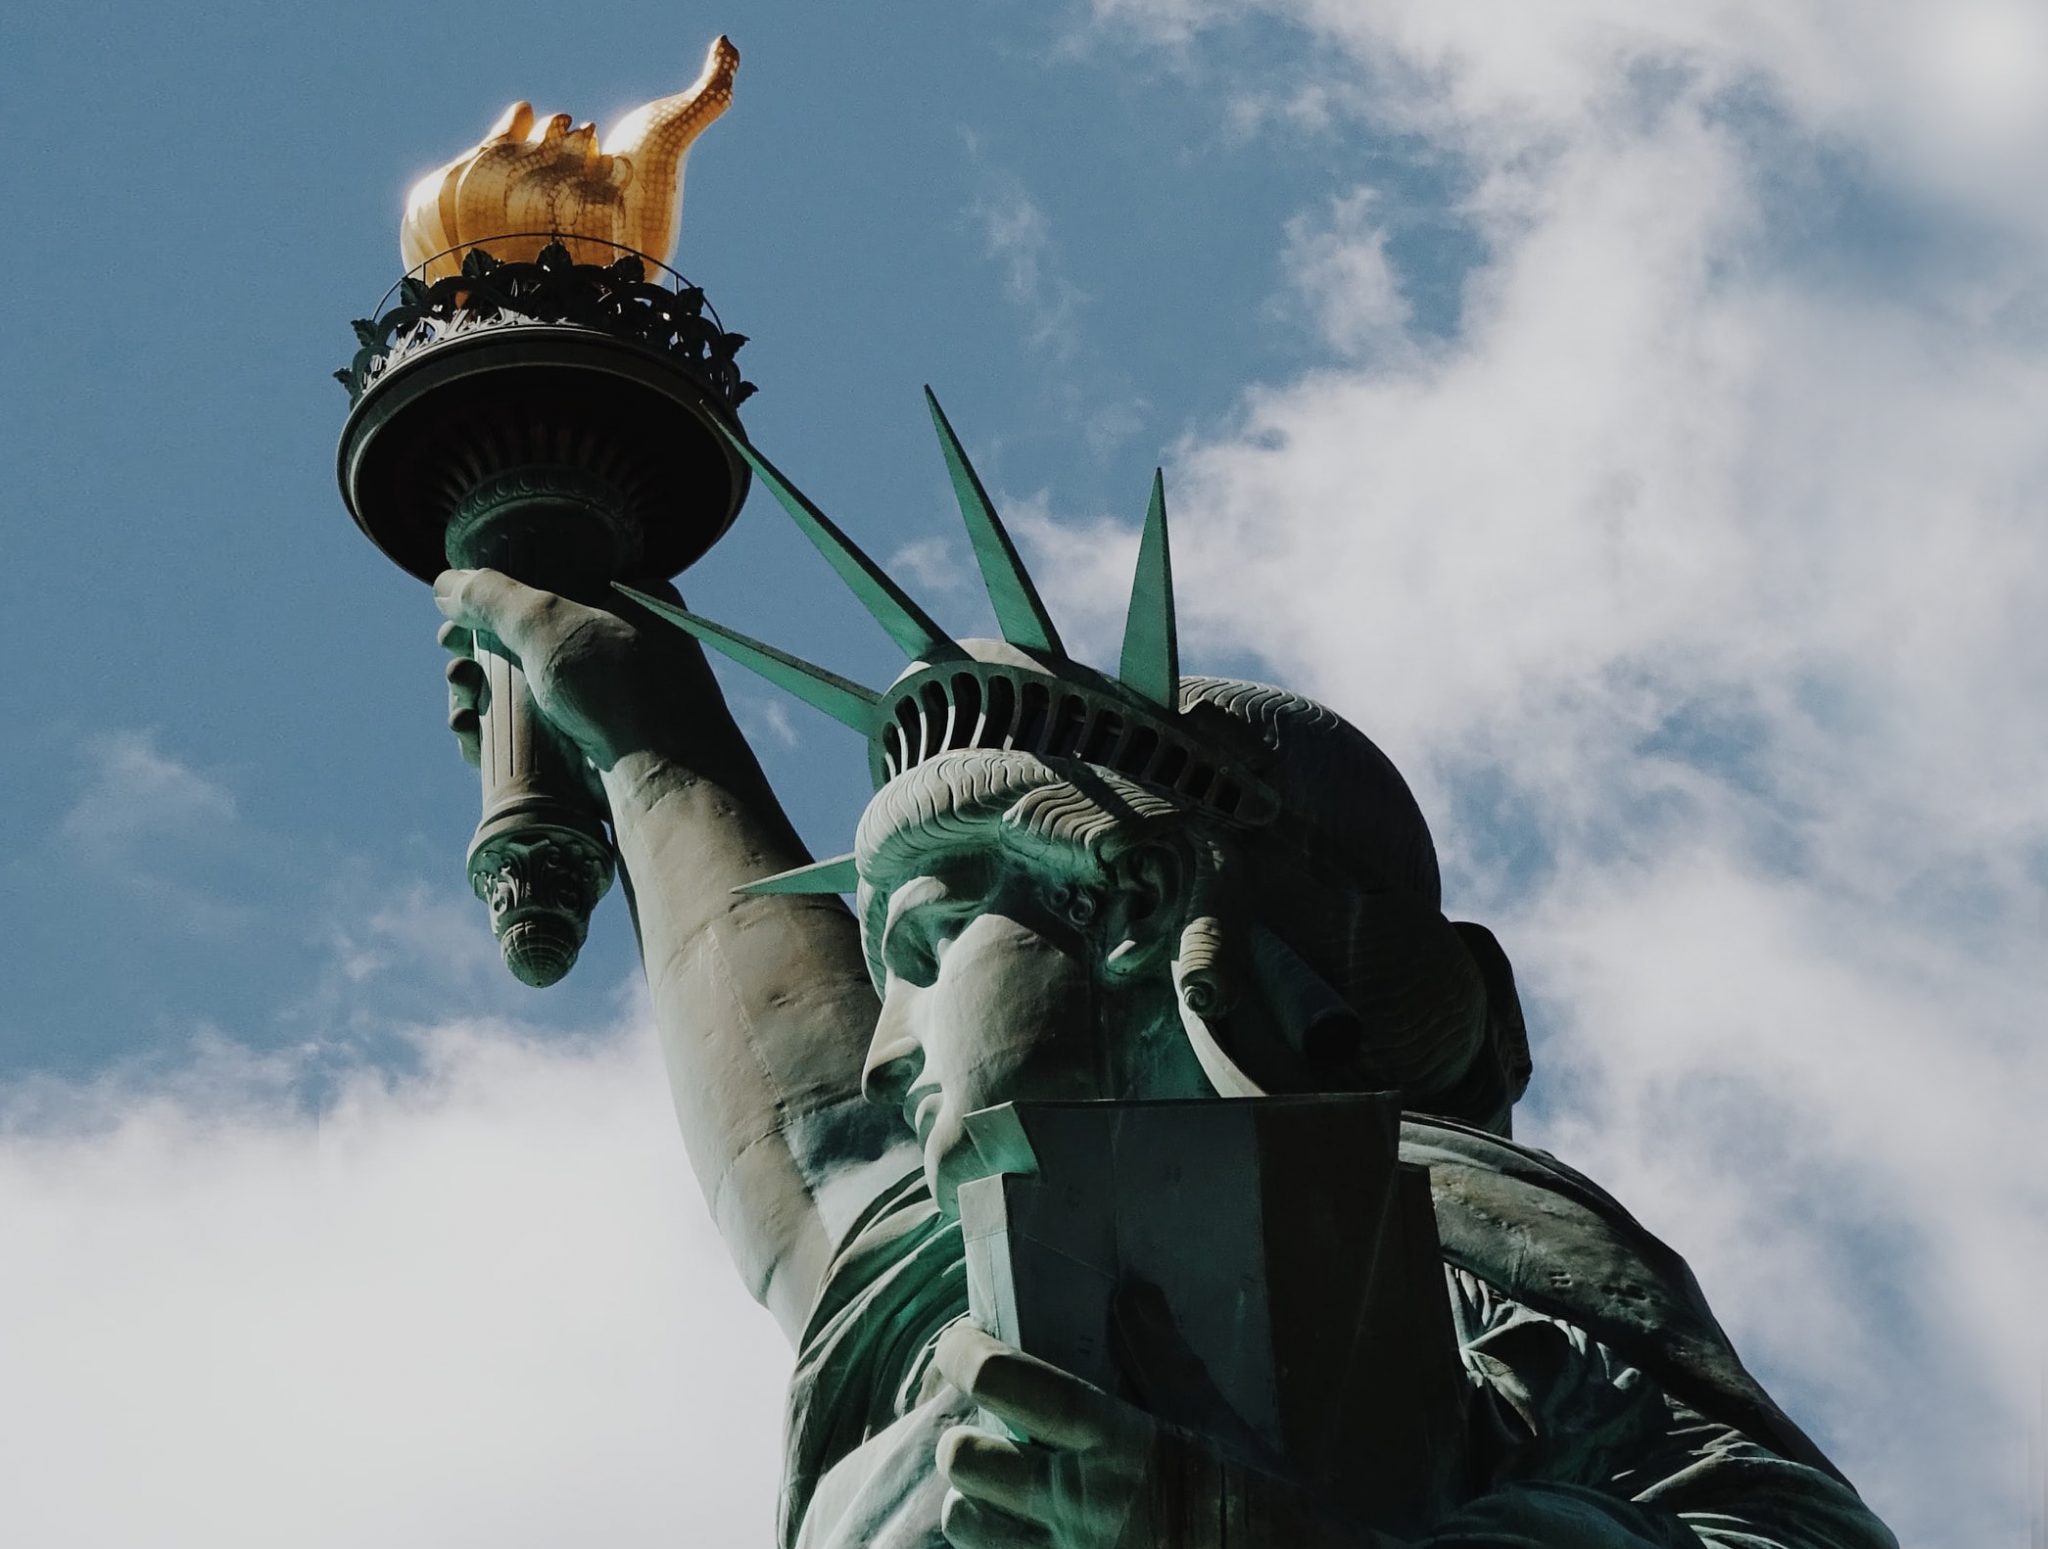 lady-liberty-s-torch-how-to-see-it-and-why-it-matters-statue-of